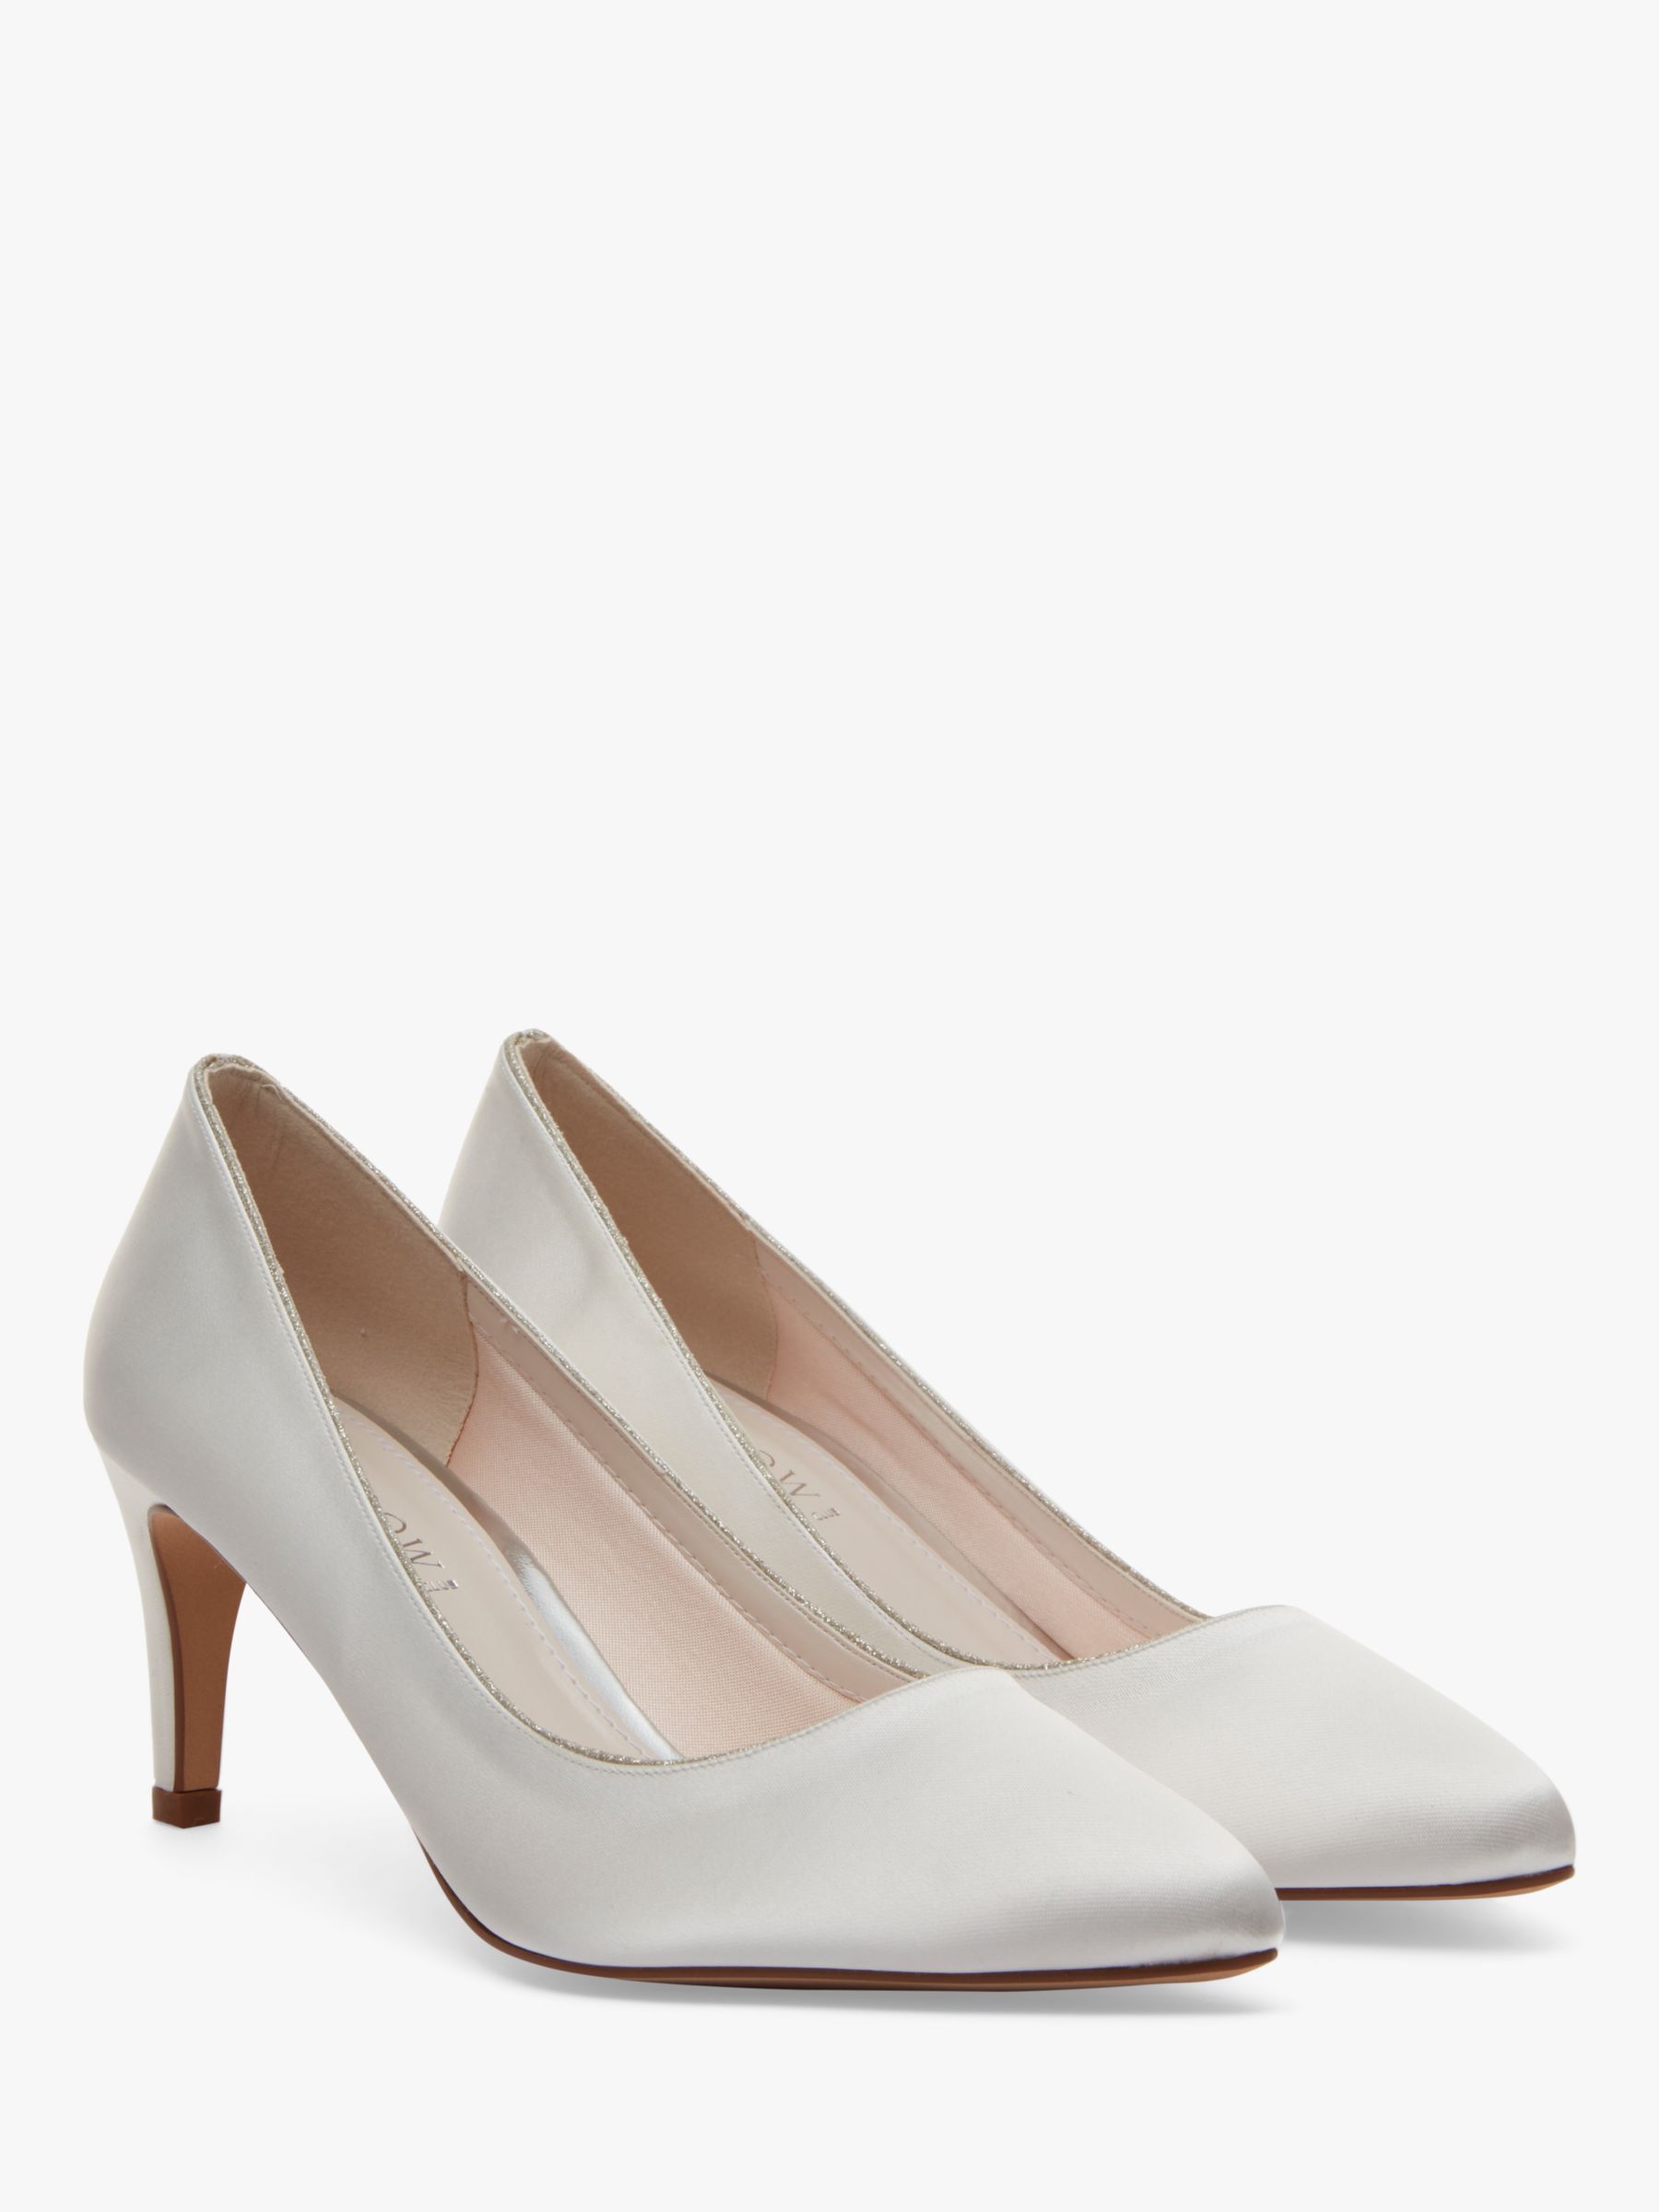 Rainbow Club Stella Pointed Court Shoes, Ivory at John Lewis & Partners